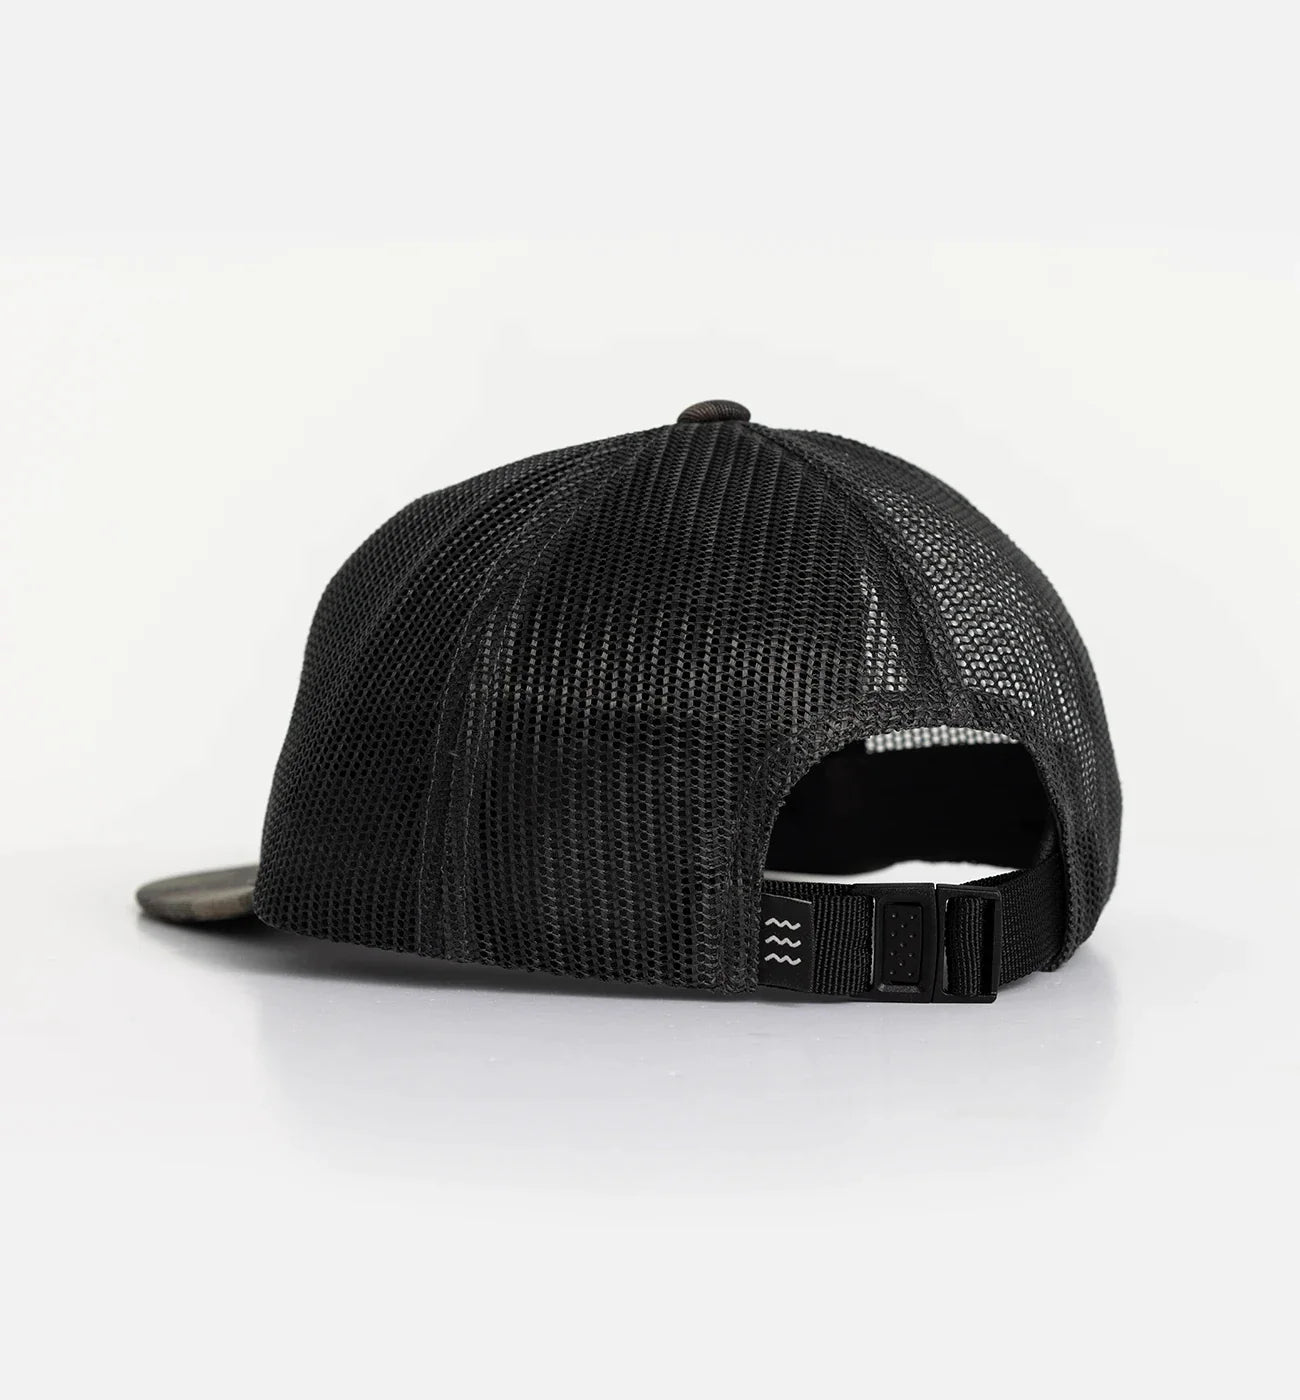 Free Fly- Reverb Packable Trucker Hat, Smoke